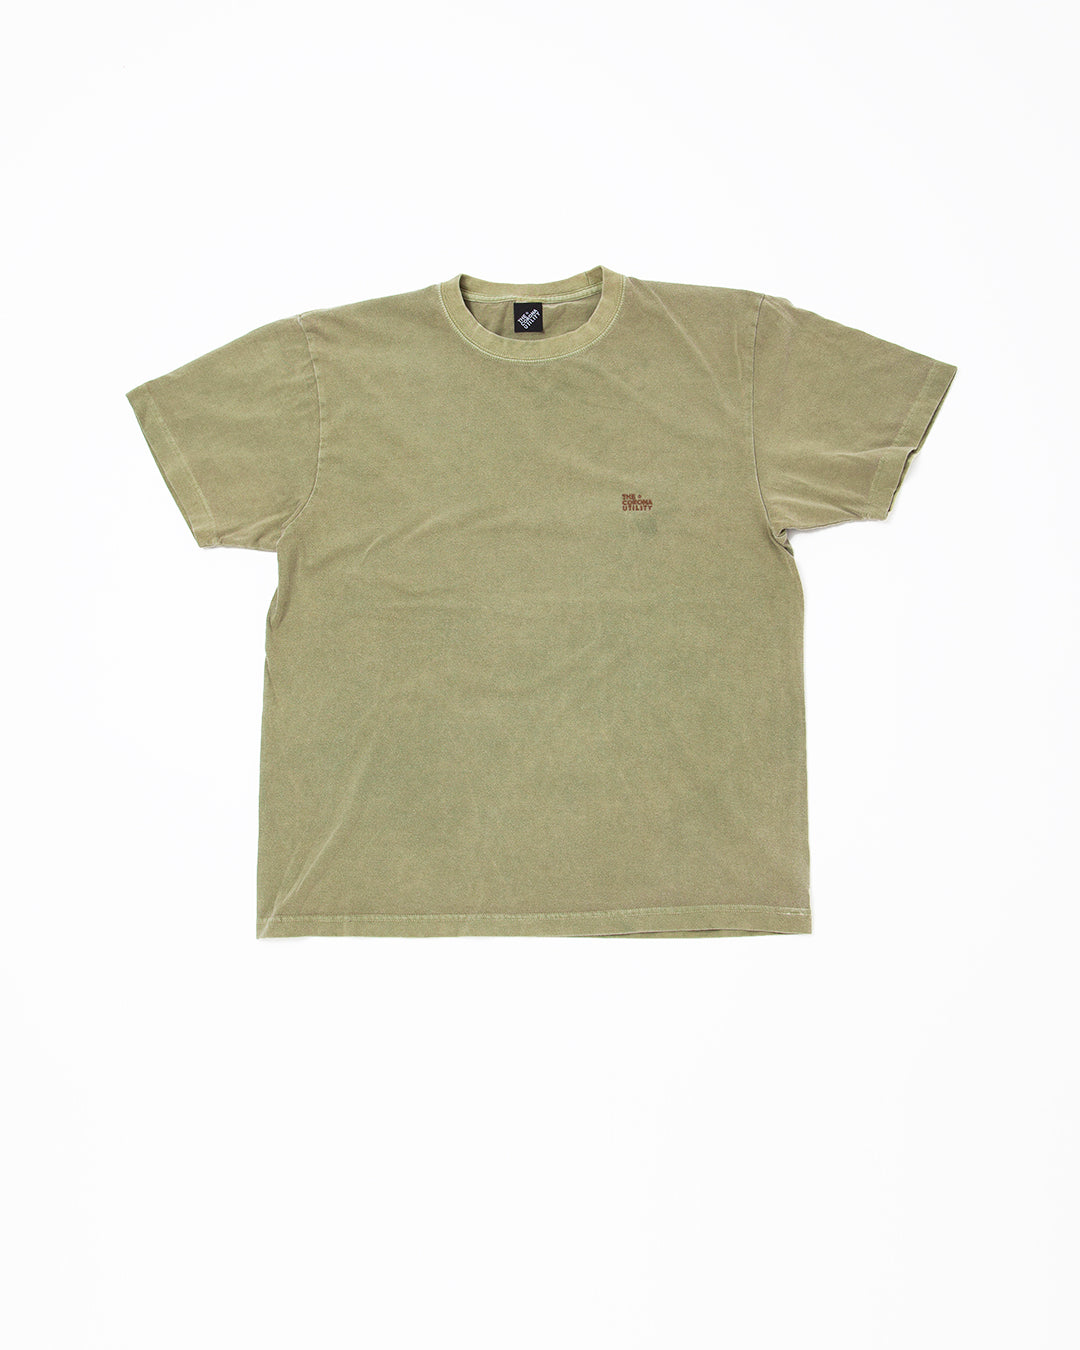 5.13 ONLINE STORE NEW ITEM  “THE CORONA UTILITY ” LOGO EMBROIDERY TEE